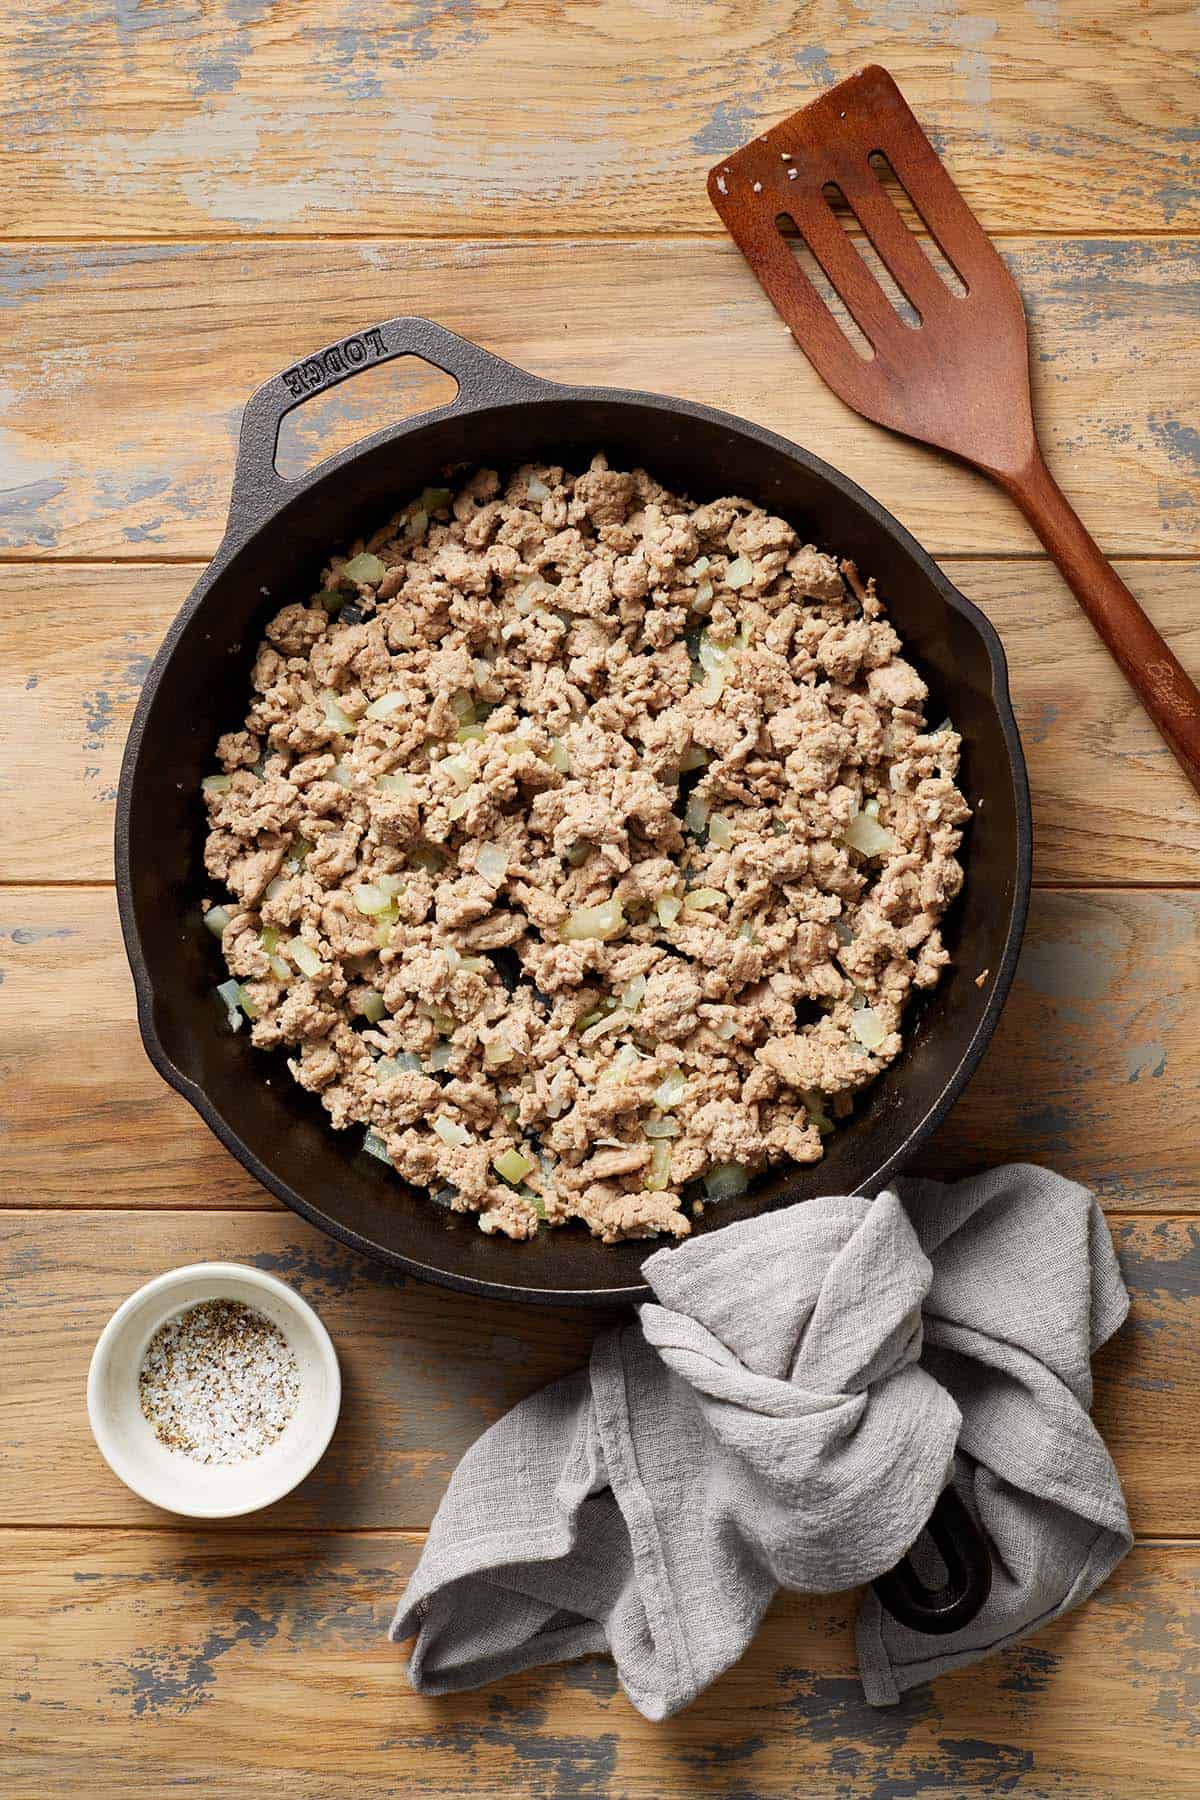 Ground turkey in a skillet on a wooden surface